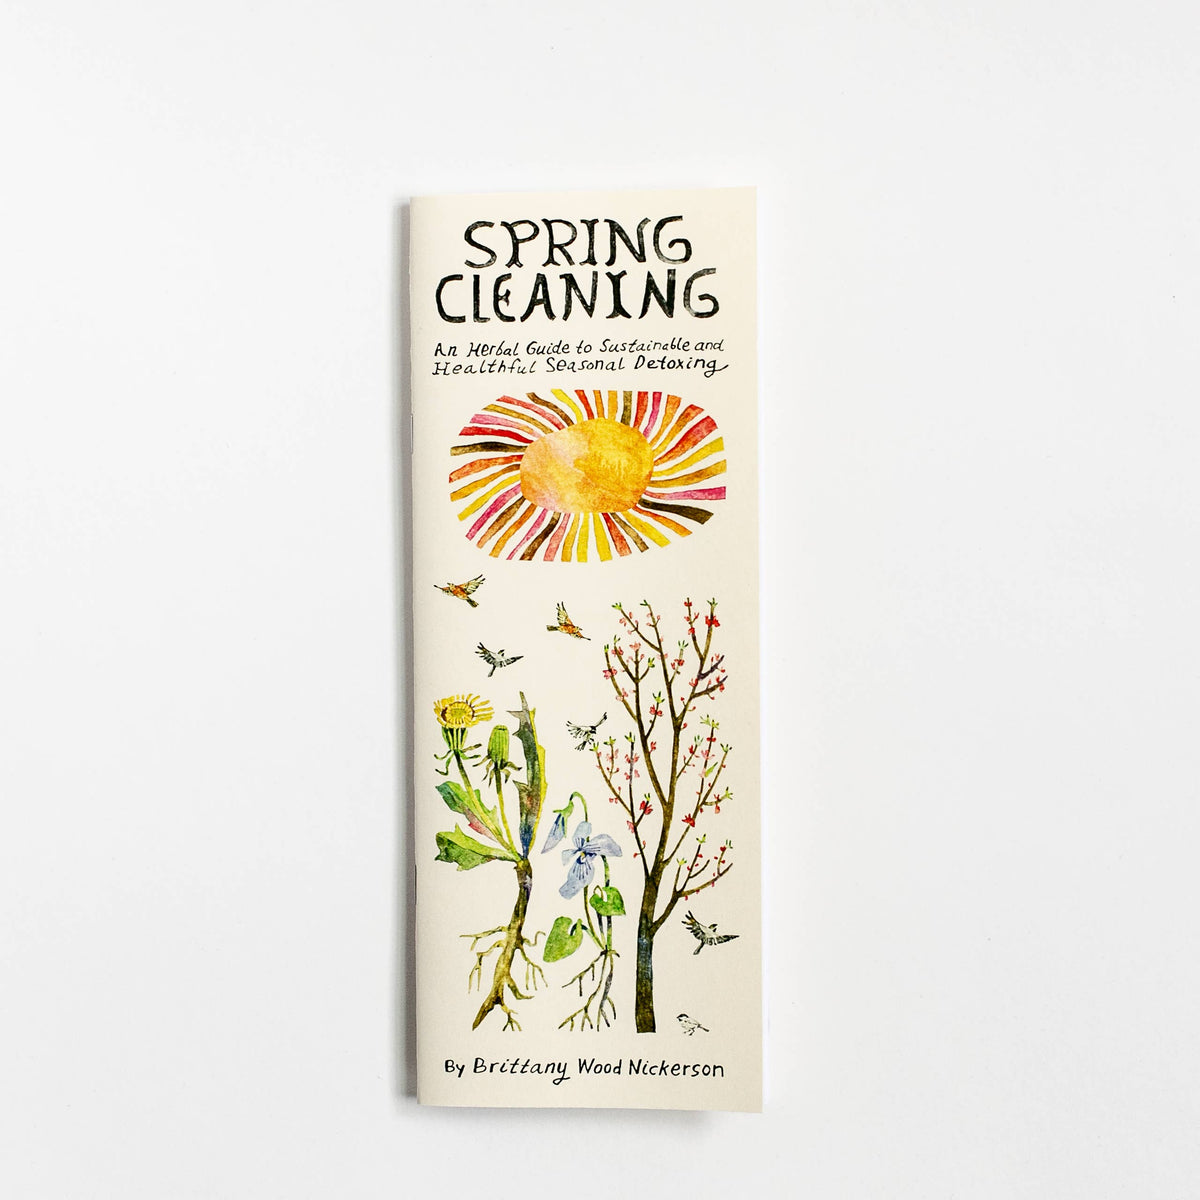 Spring Cleaning by Brittany Wood Nickerson